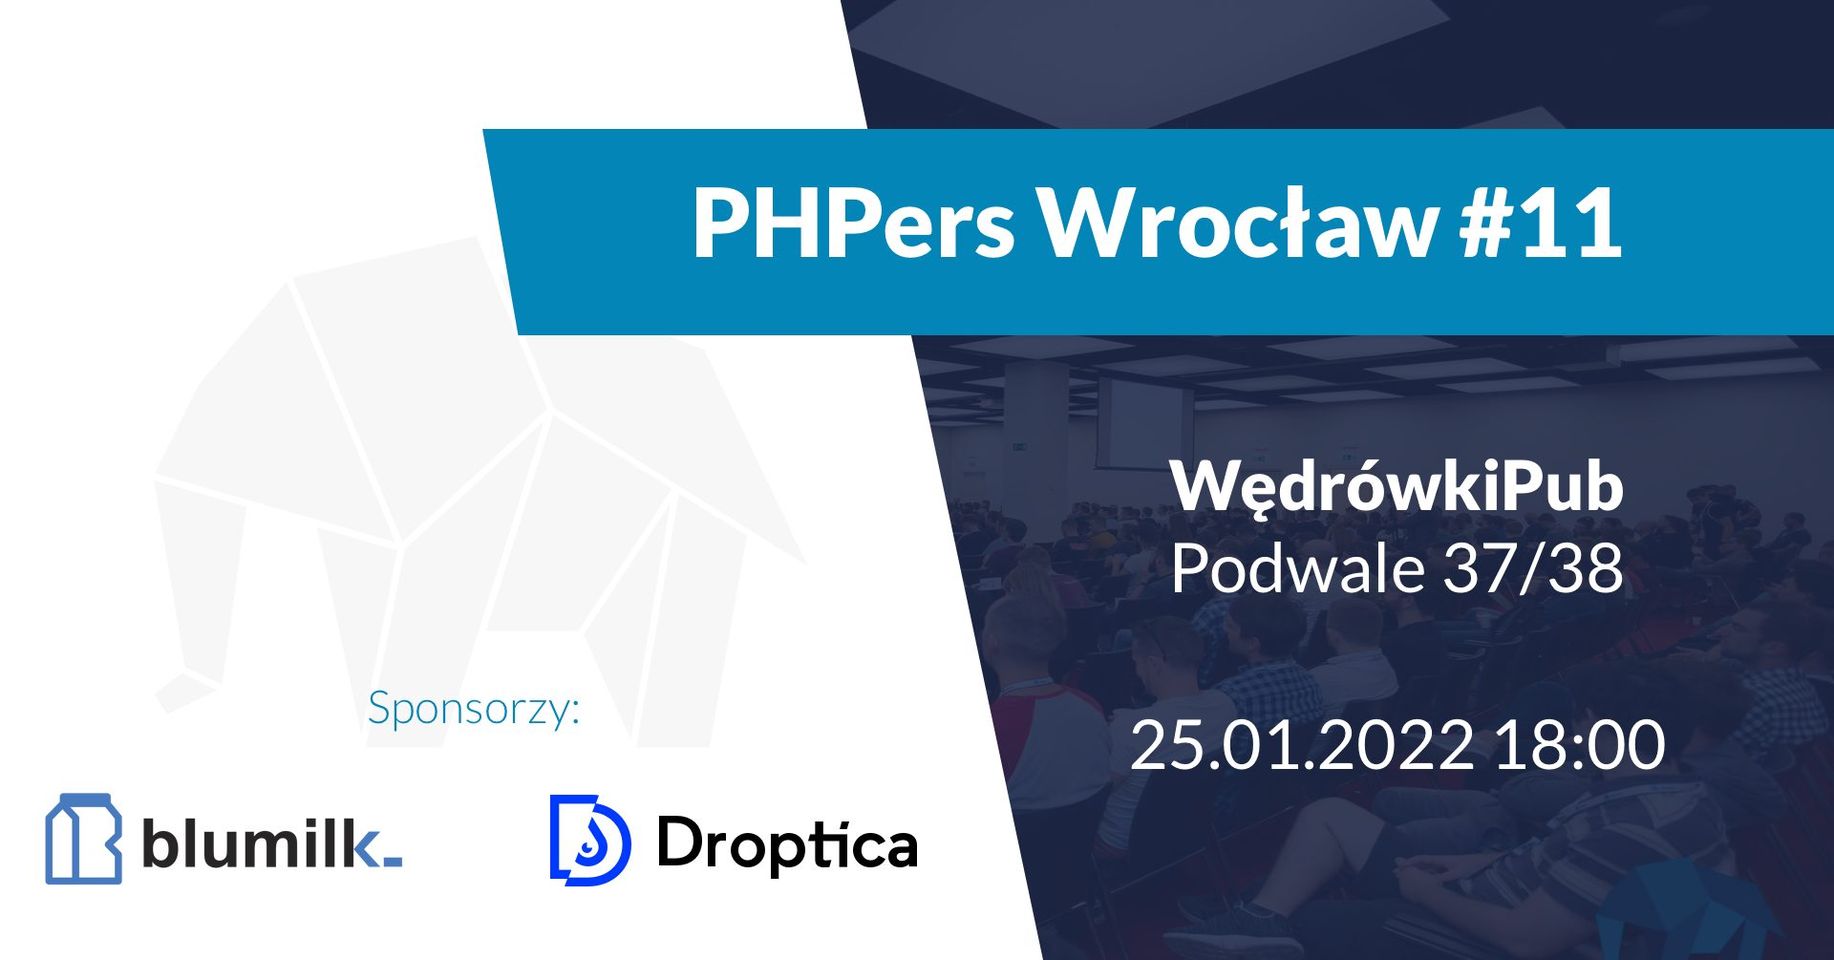 phpers-wroclaw-11